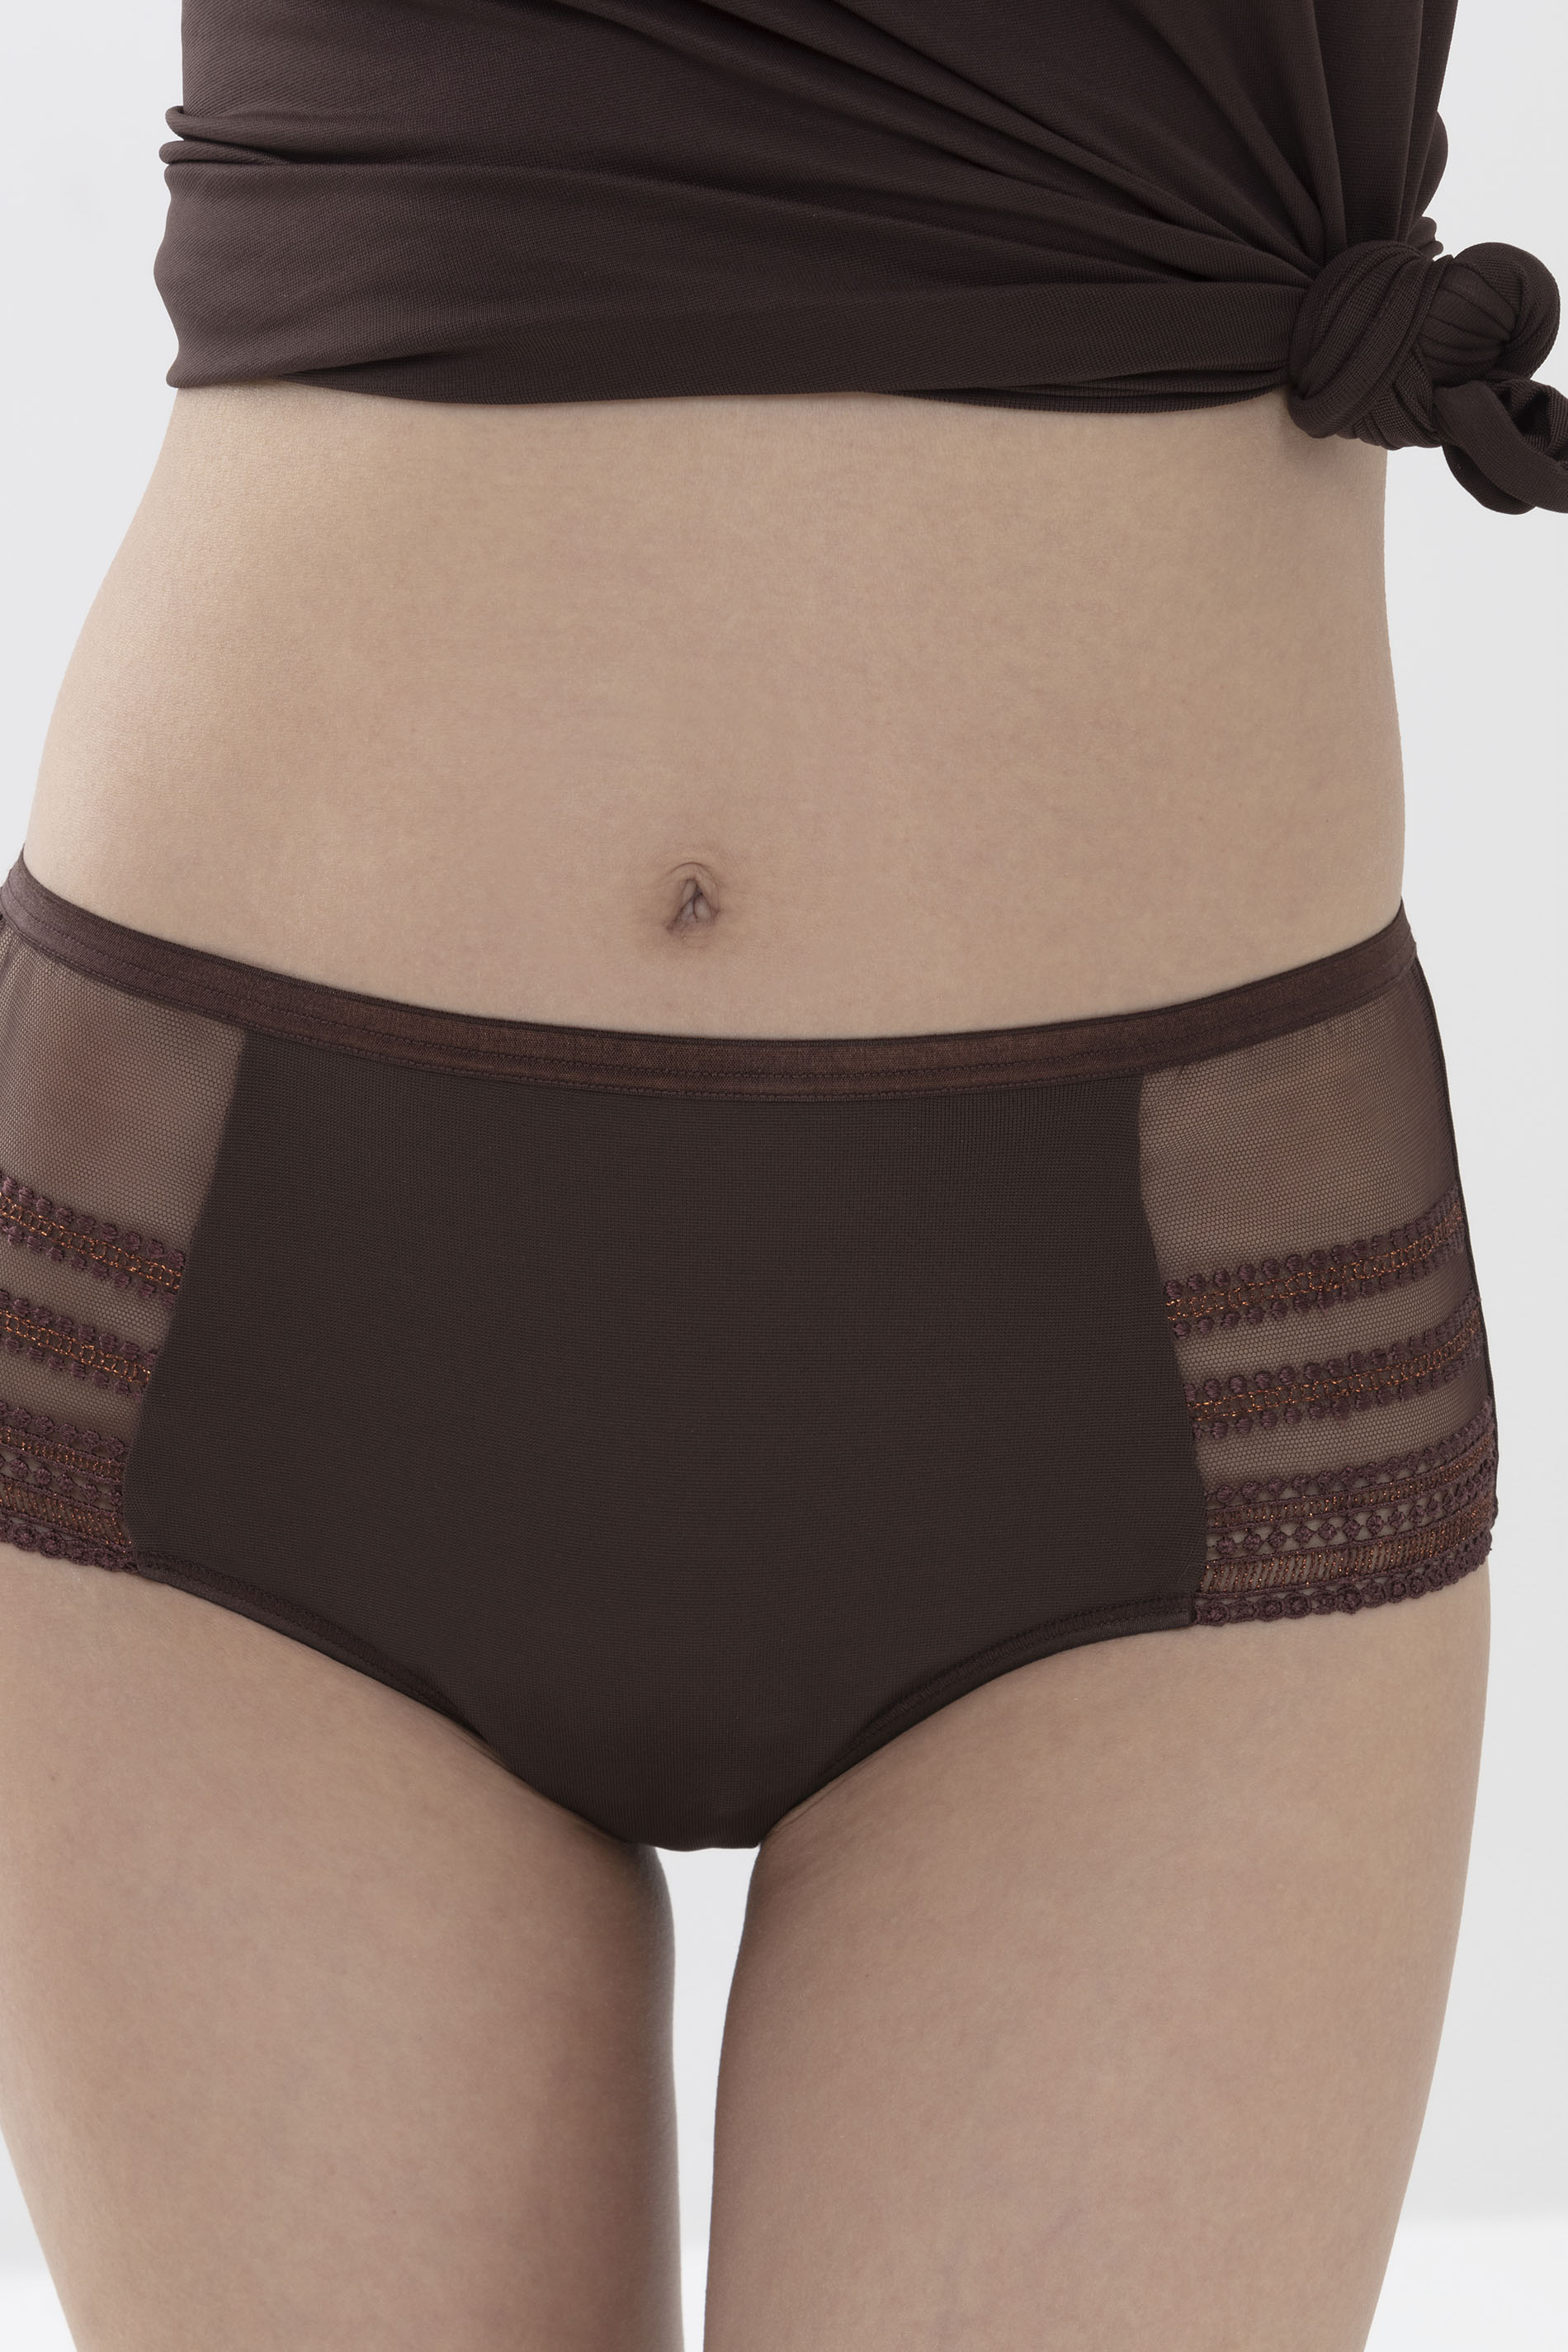 Panty Liquorice Brown Emotion Deluxe Detailansicht 01 | mey®